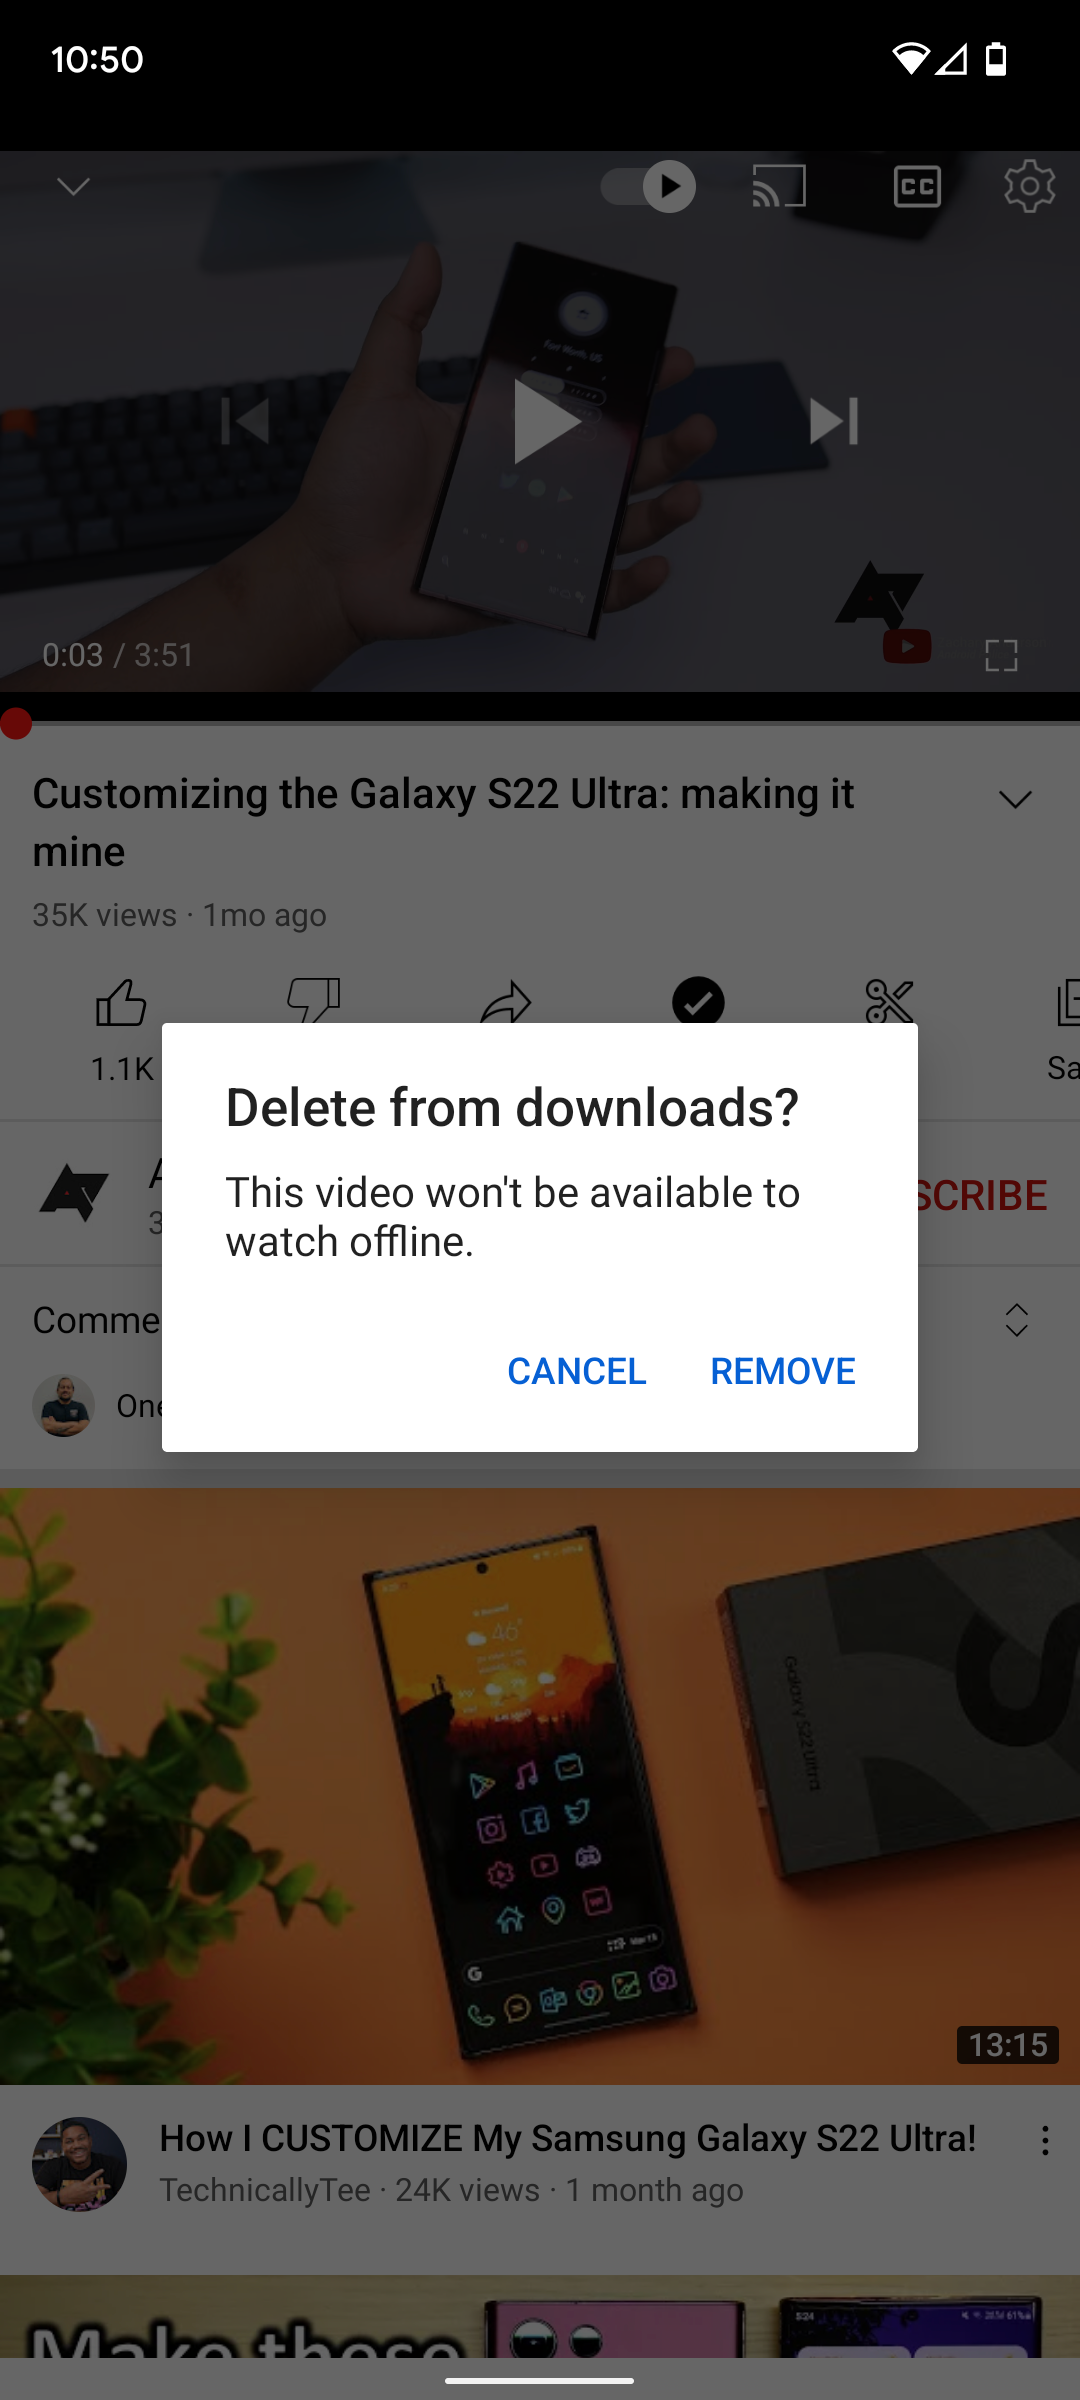 popup asking to remove video from downloads